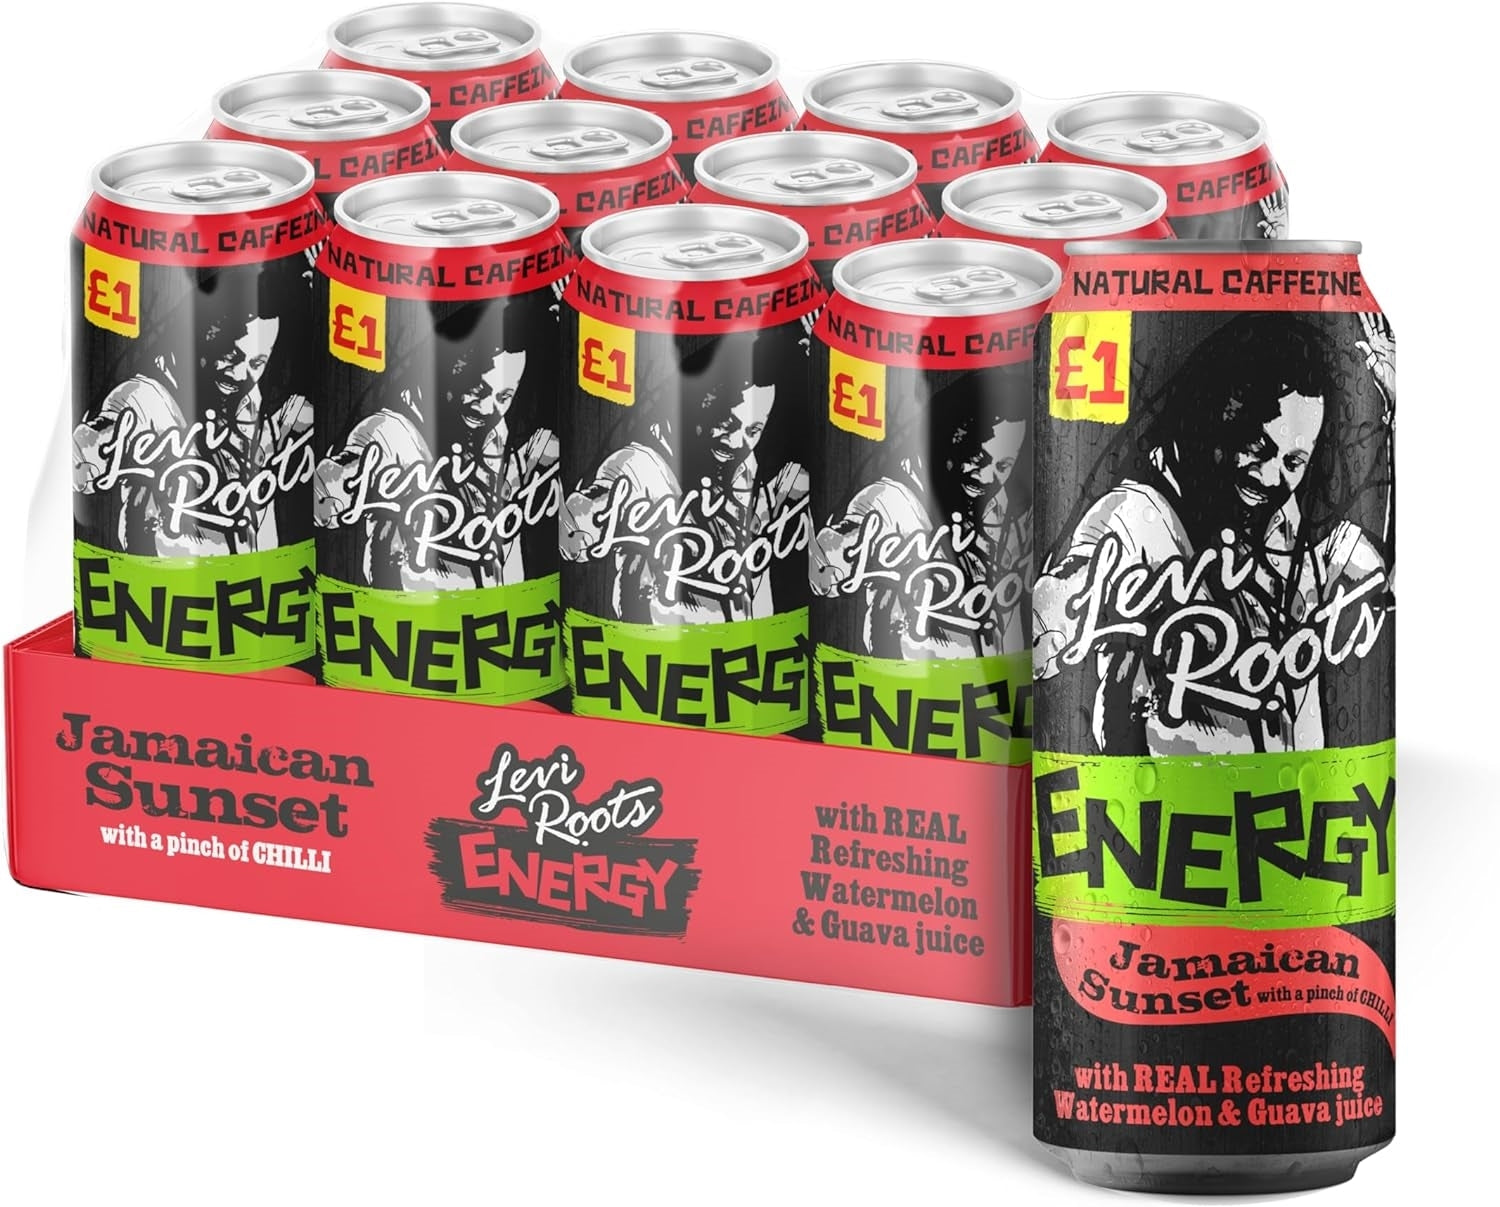 LEVI ROOTS ENERGY JAMAICAN SUNSET CANS 500ML PM £1